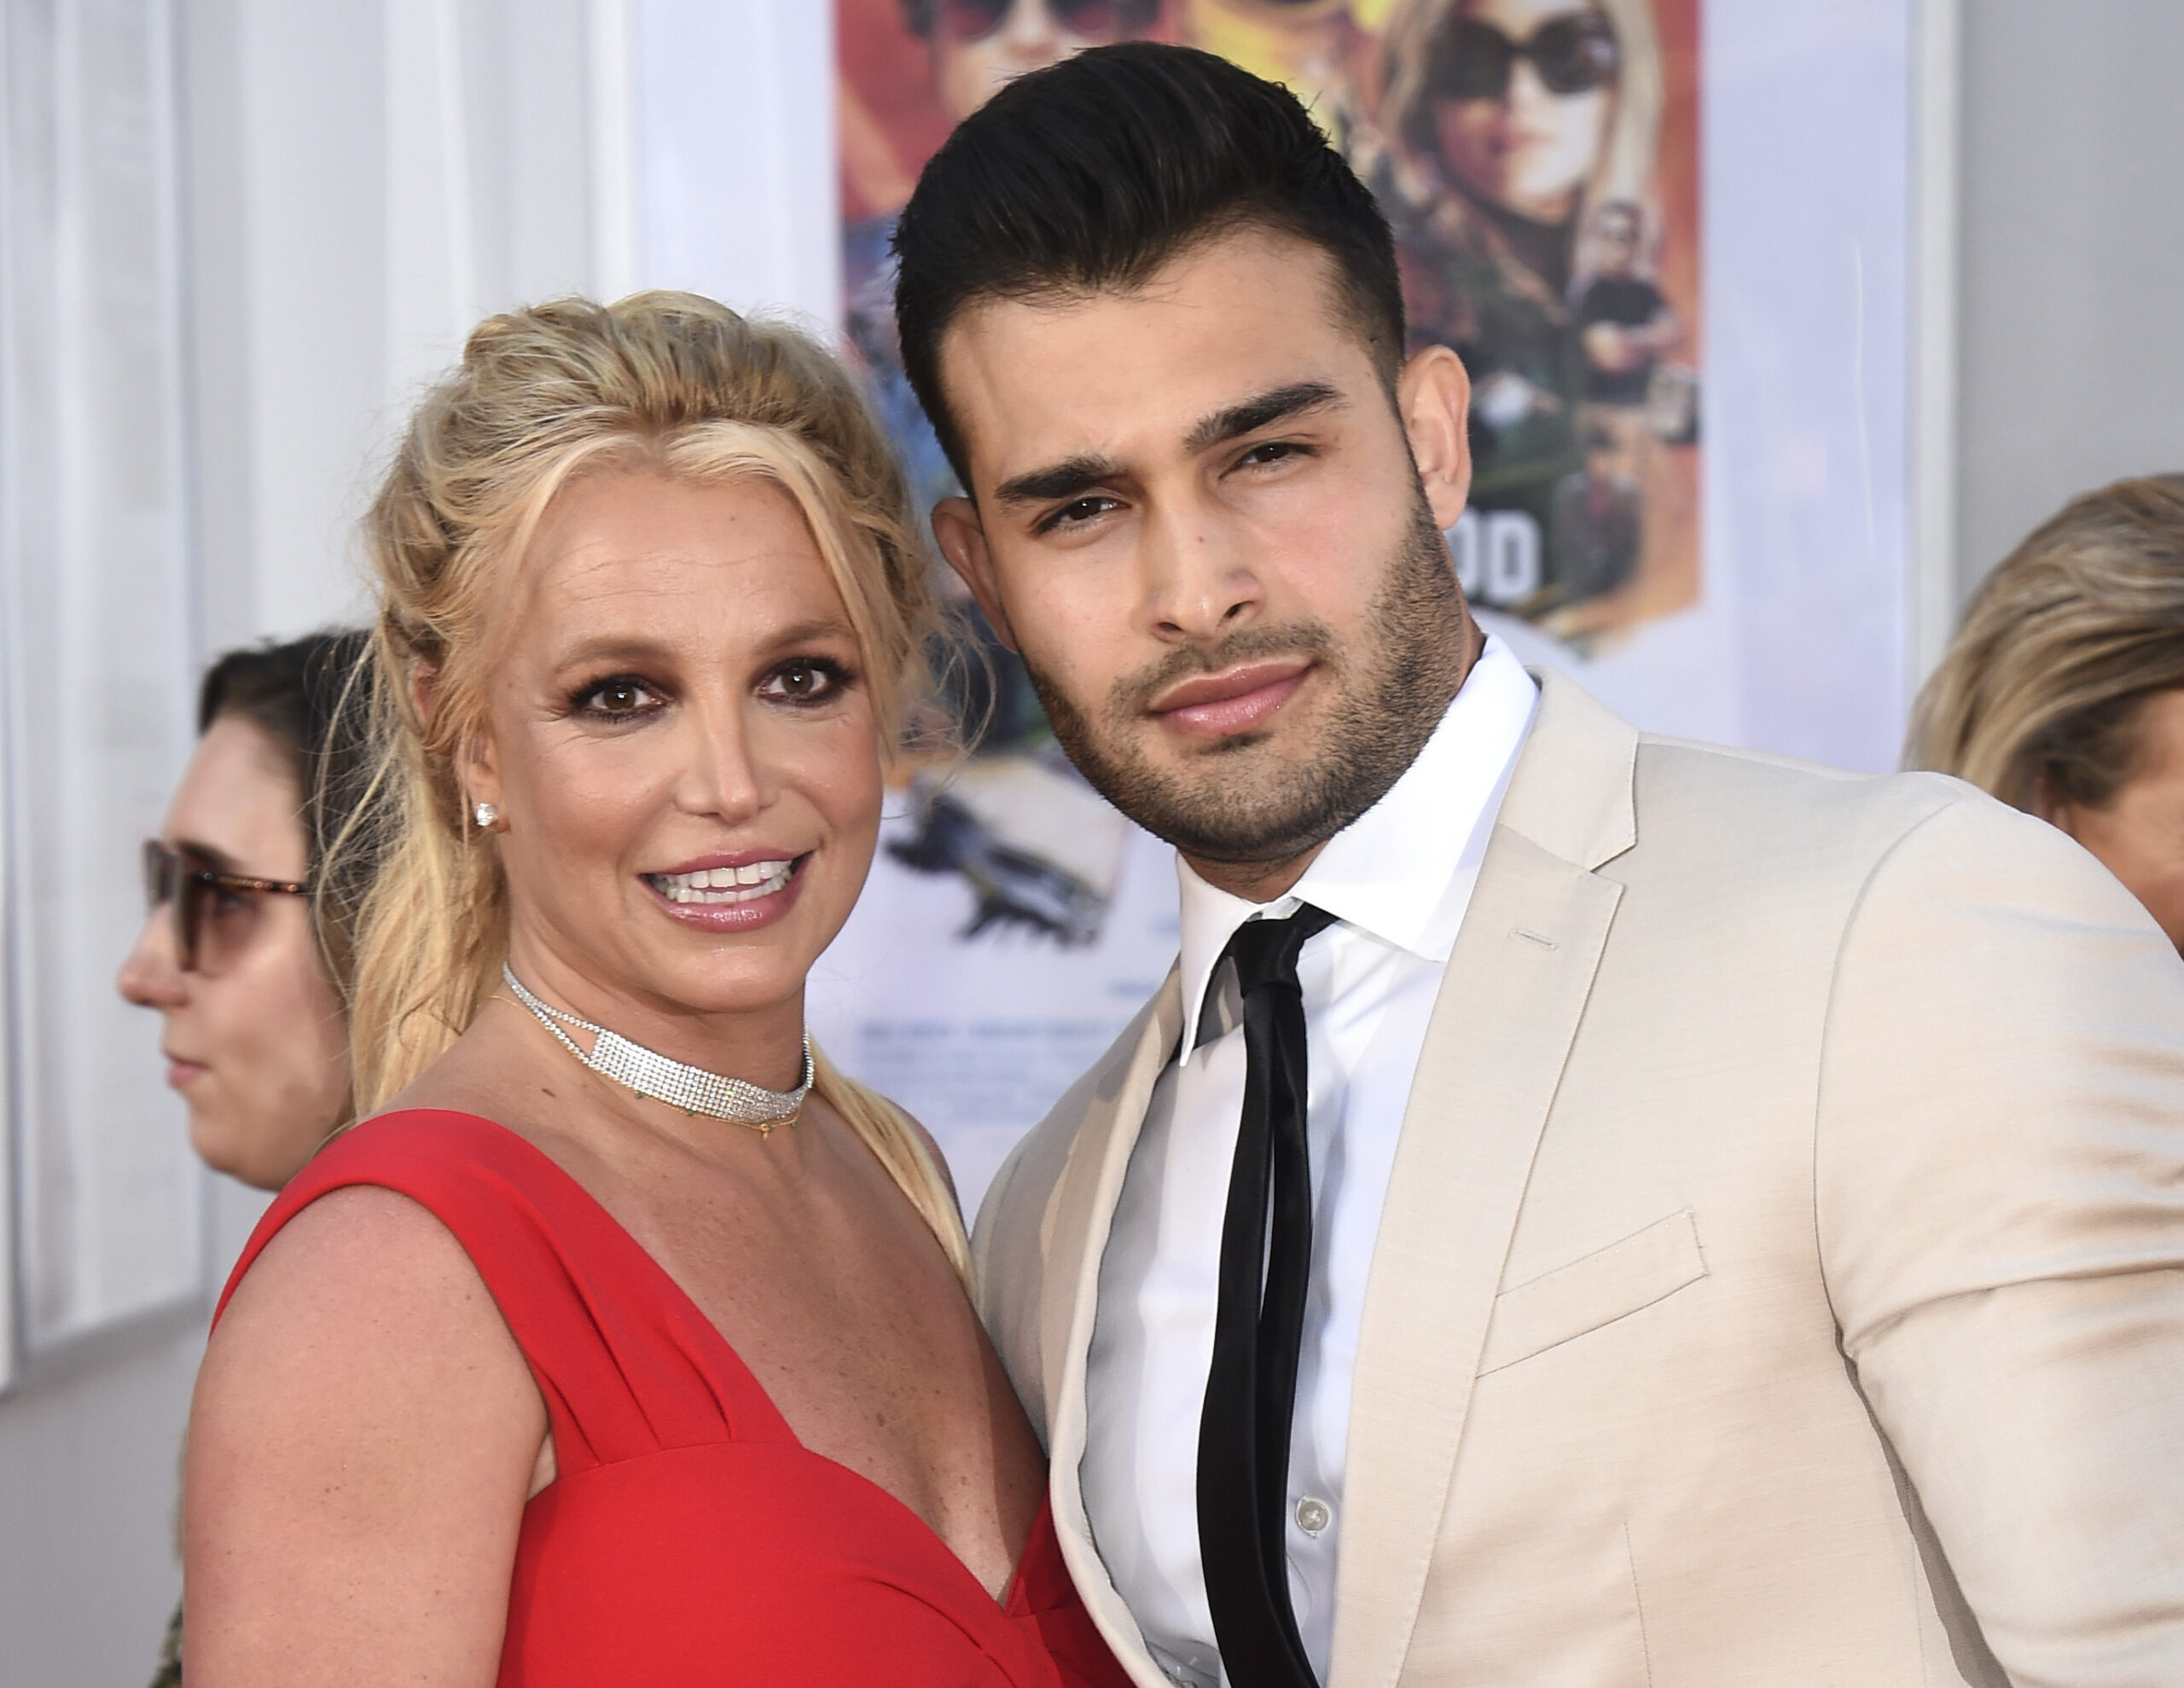 FILE - Britney Spears and Sam Asghari appear at the Los Angeles premiere of "Once Upon a Time in Hollywood" on July 22, 2019. Spears has married her longtime partner Sam Asghari at a Southern California ceremony that came months after the pop superstar won her freedom from a court conservatorship. Asghari’s representative Brandon Cohen confirmed the couple’s nuptials. (Photo by Jordan Strauss/Invision/AP, File)